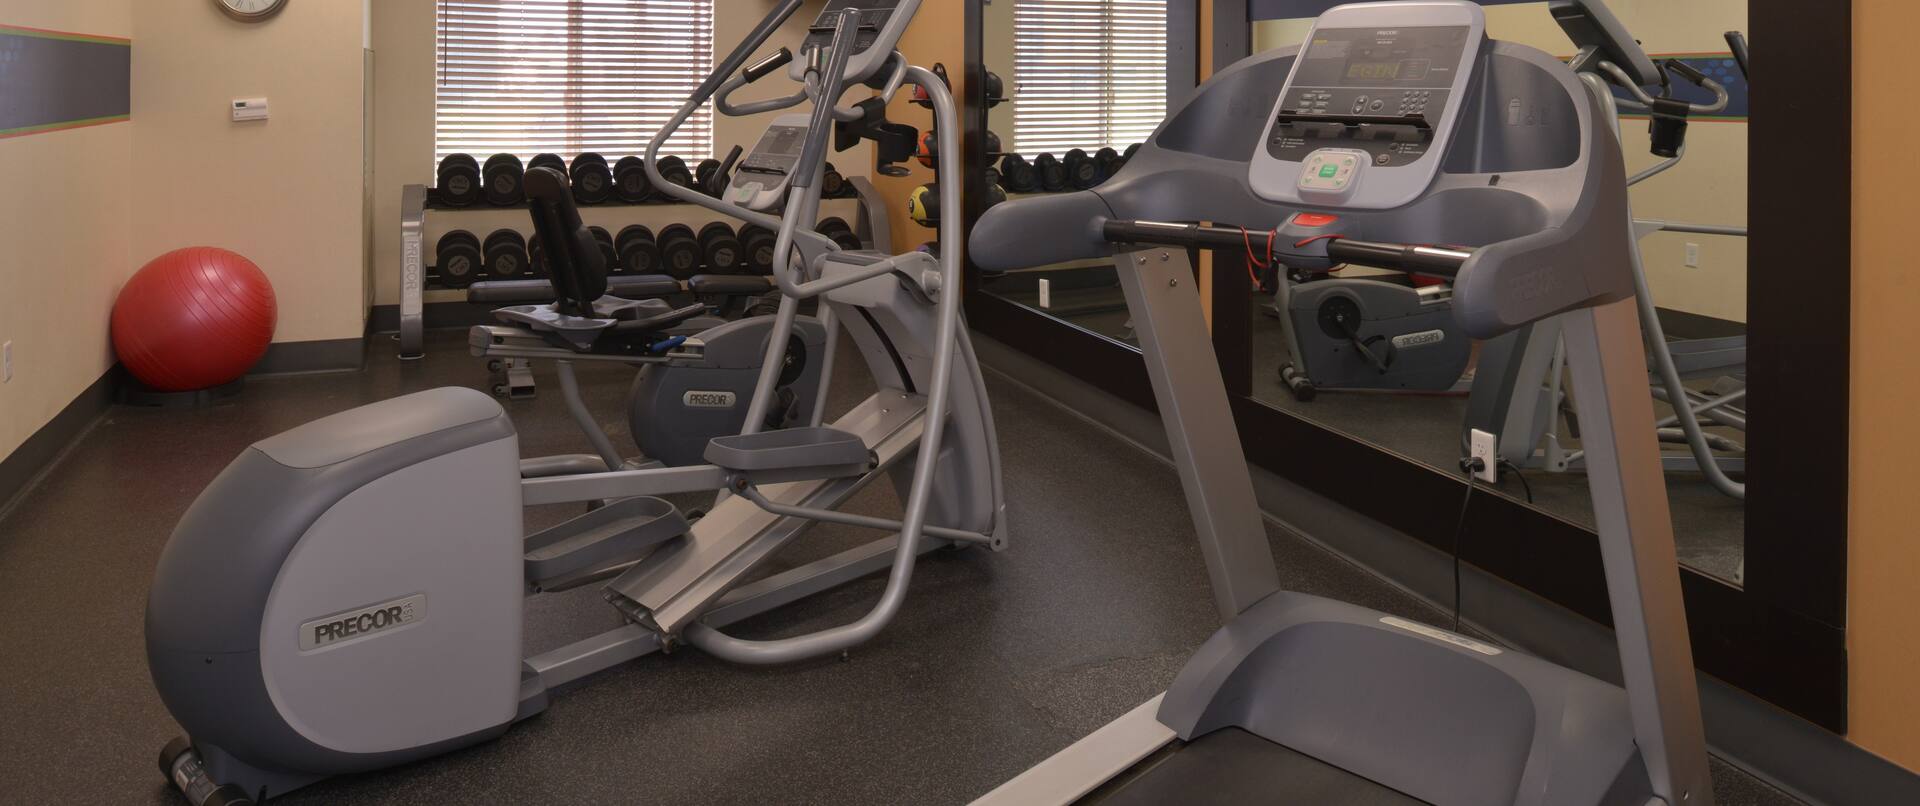 Fitness Room with Treadmill Recumbent Bike and Weights